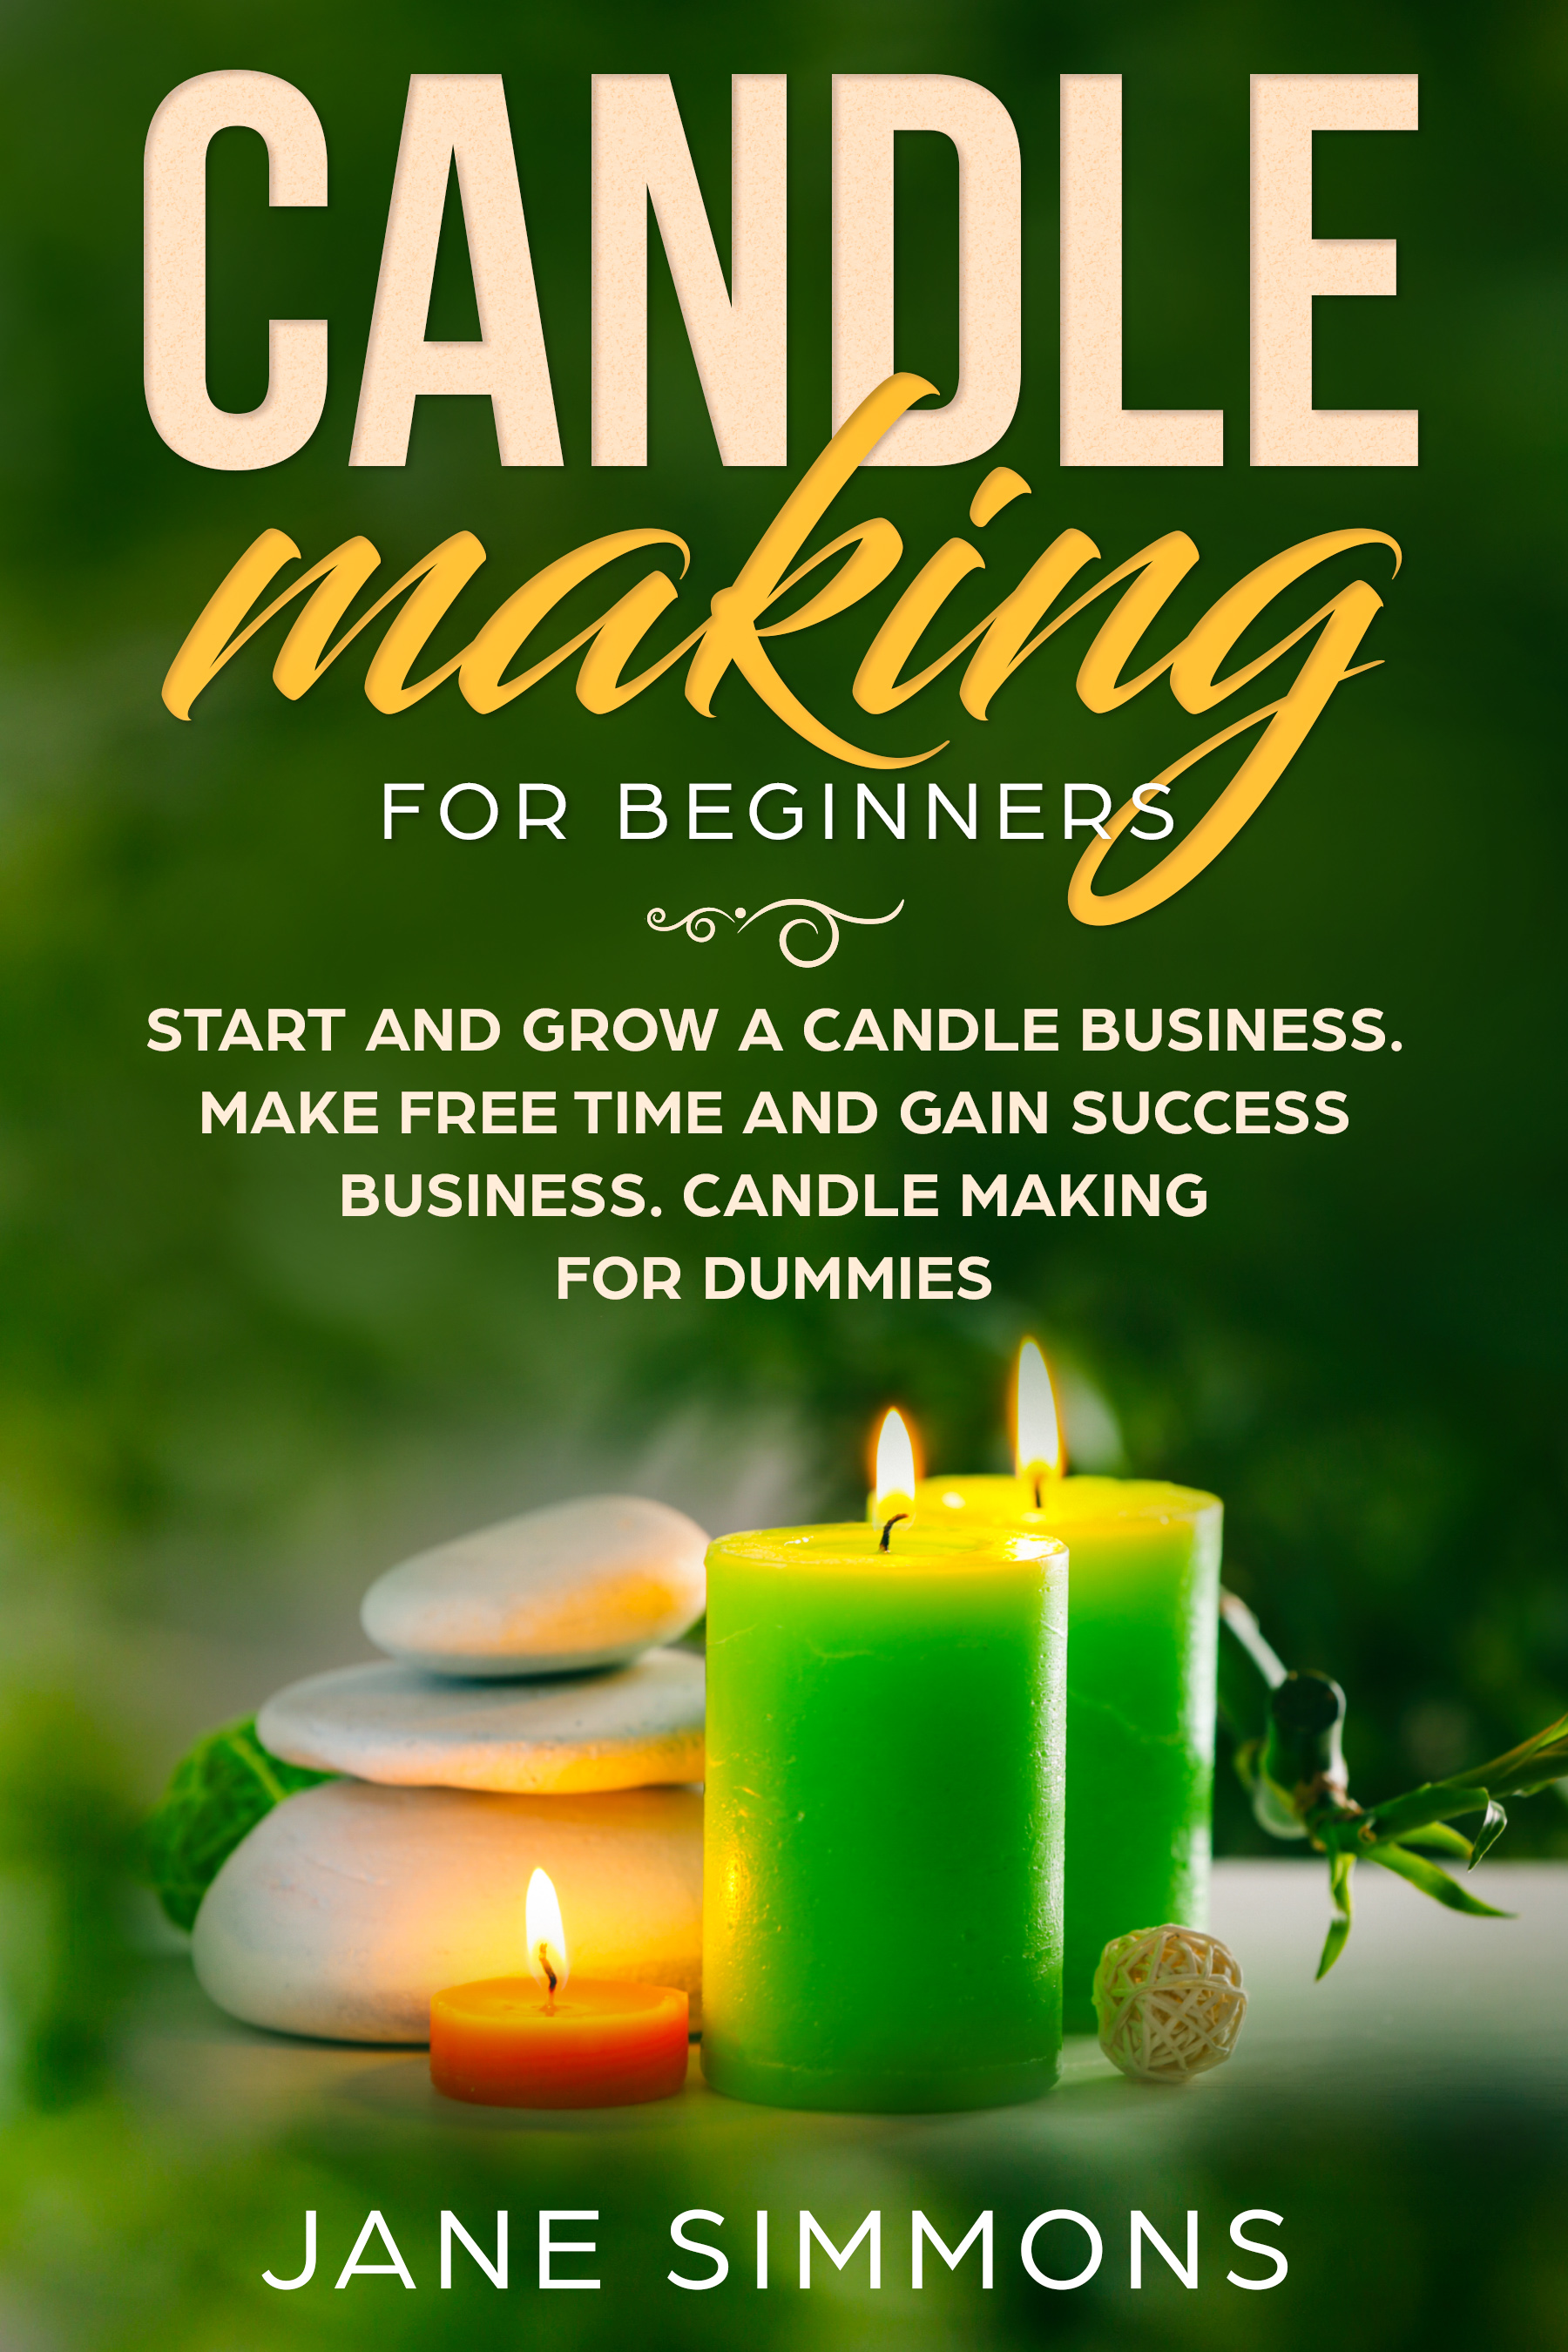 FREE: Candle Making For Beginners by Jane Simmons